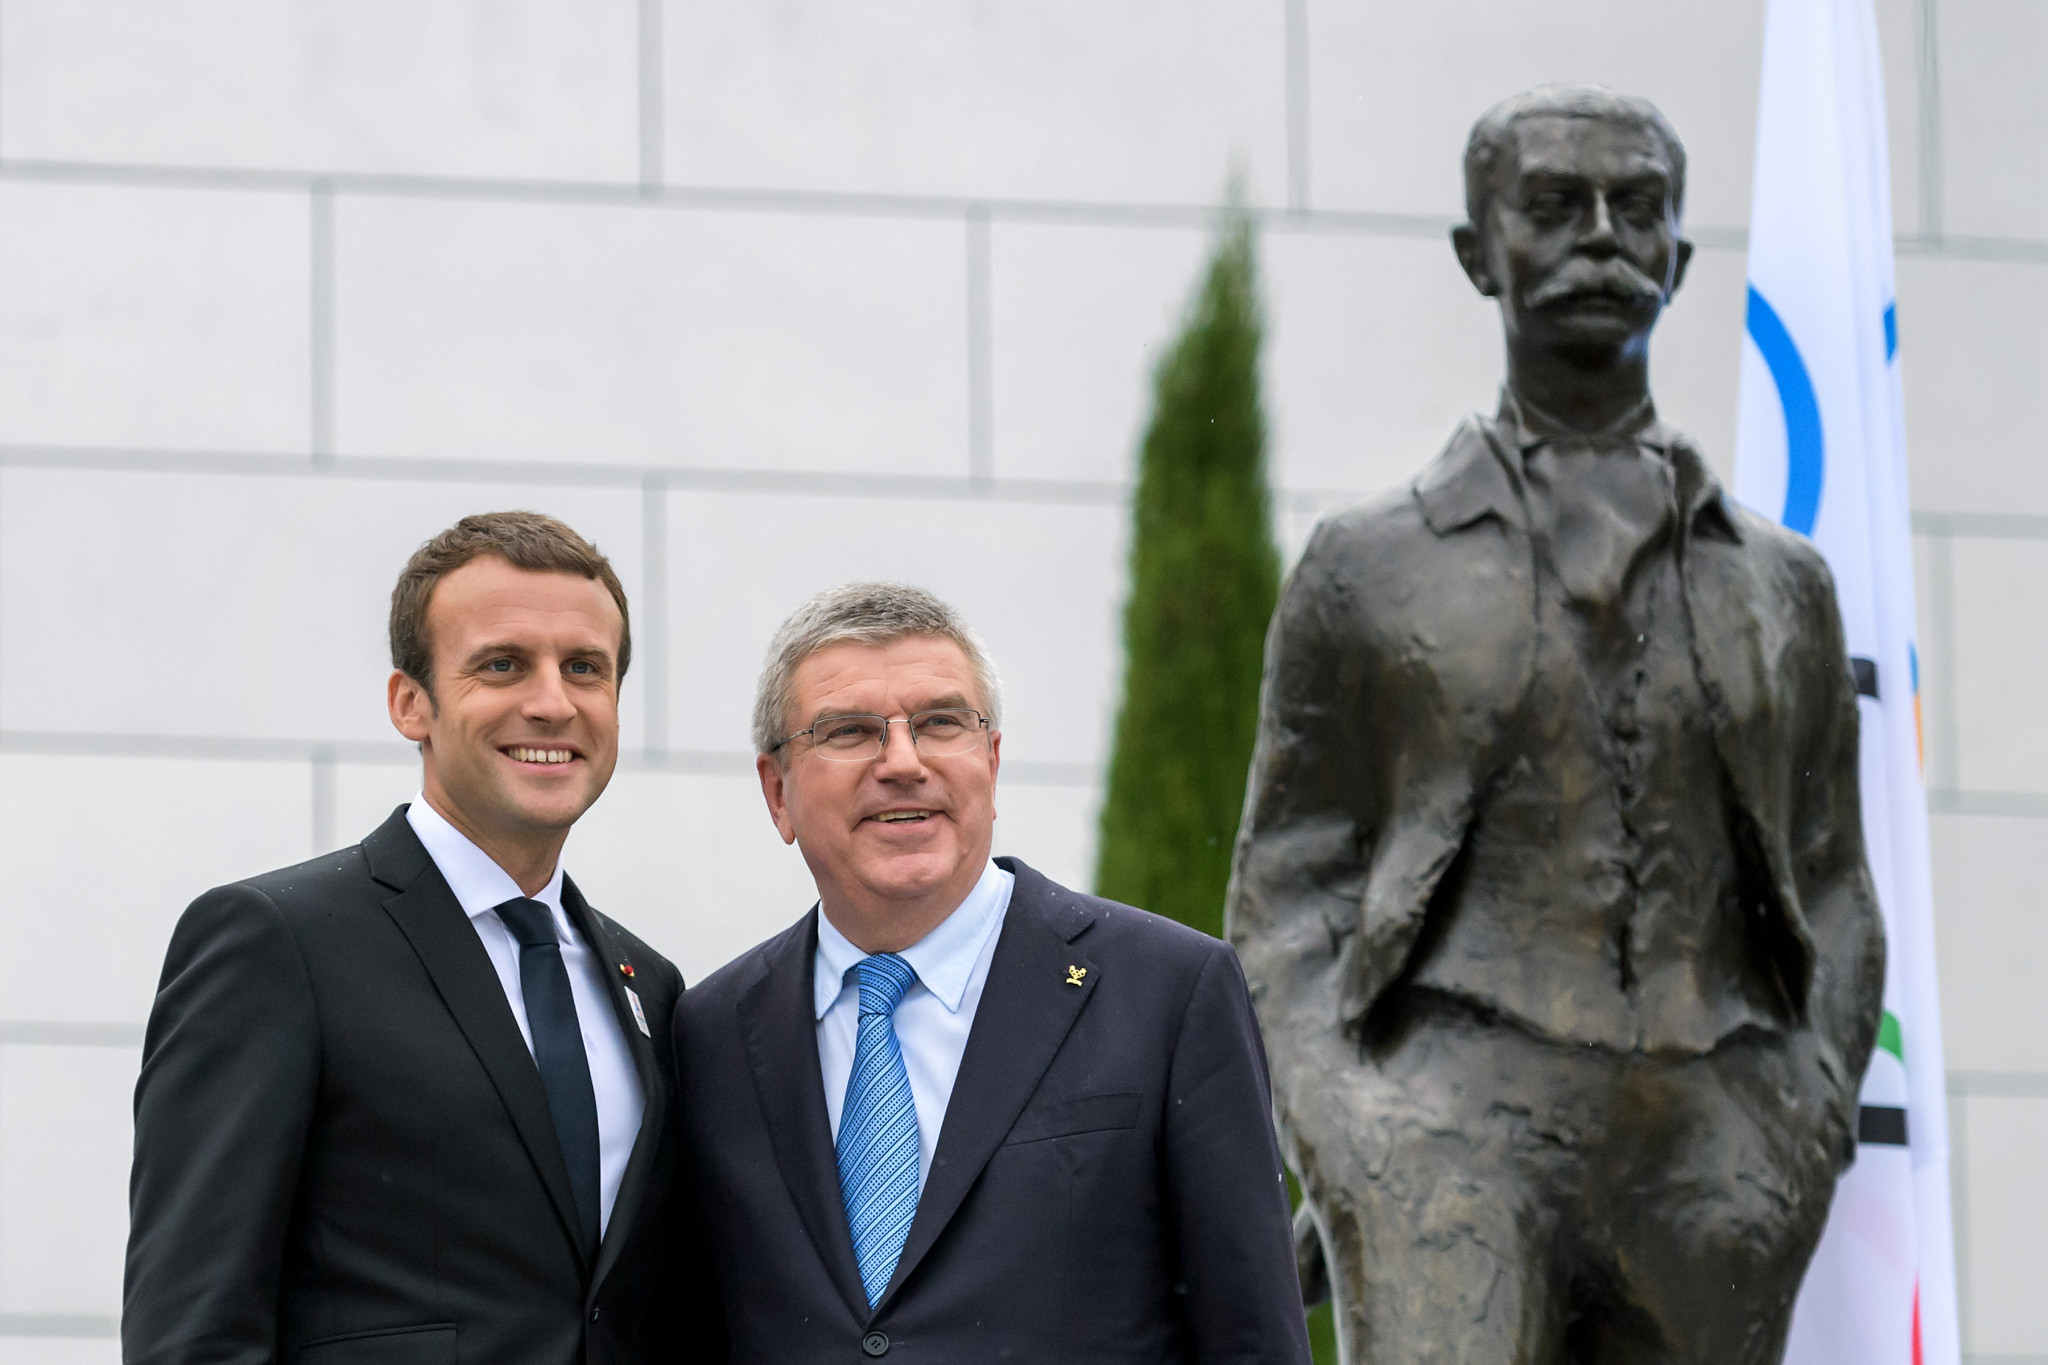 French President Emmanuel Macron and International Olympic Committee President Thomas Bach pose next to a statue of IOC founder Pierre de Coubertin ©Getty Images